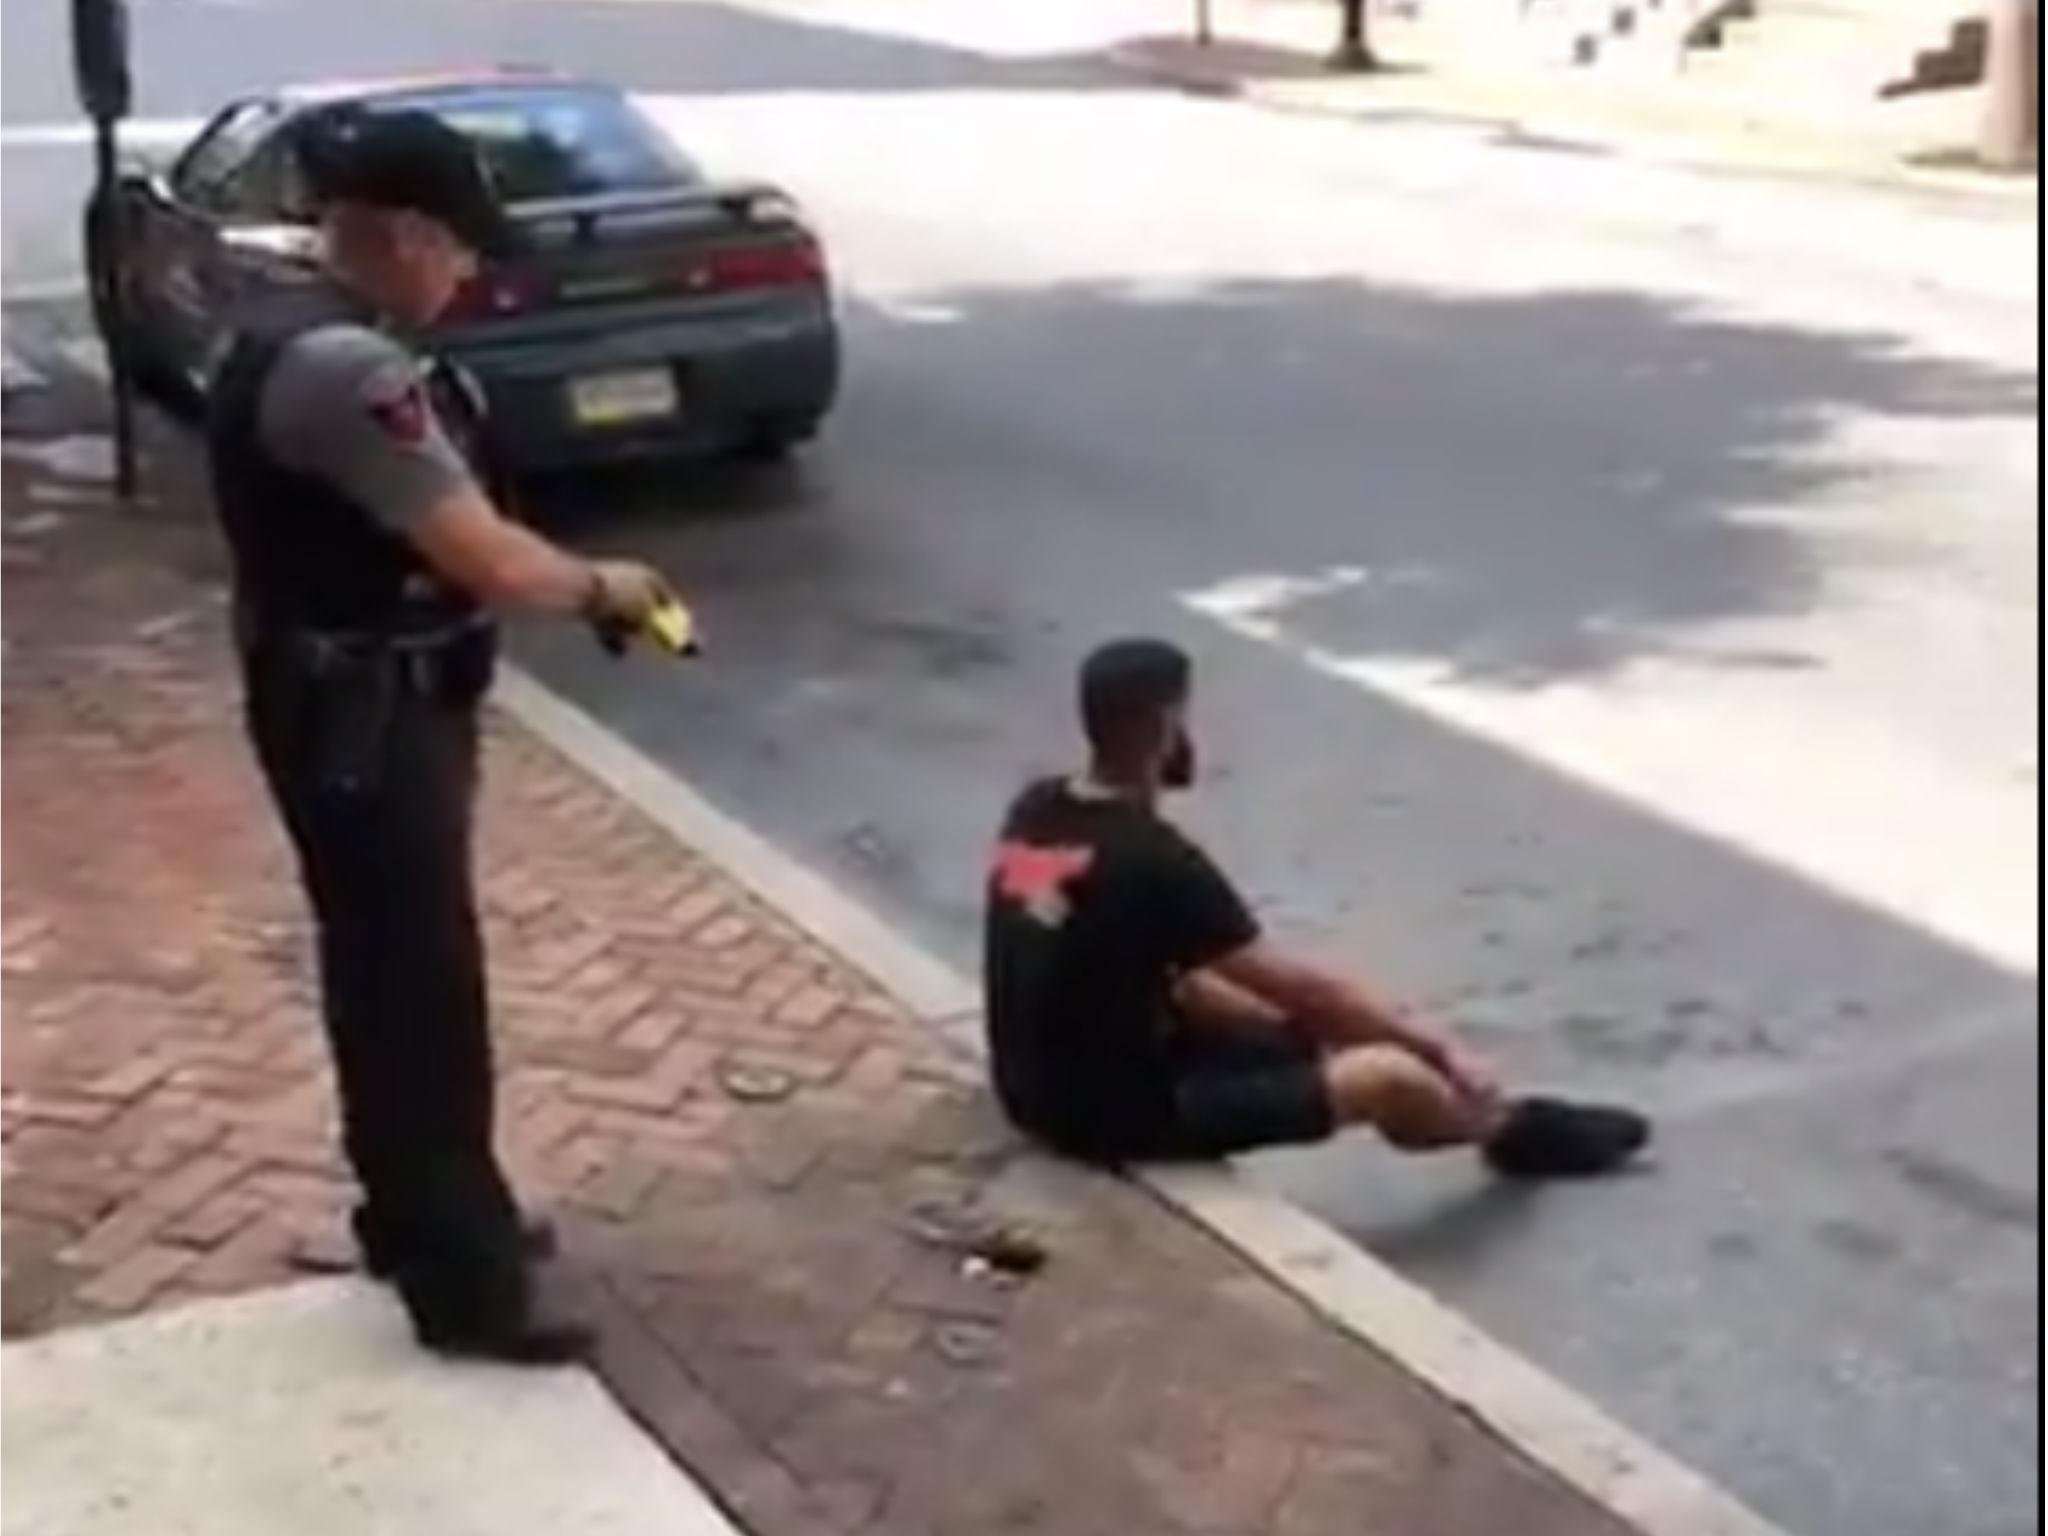 image for Unarmed black man tased by police in the back while sitting on a curb